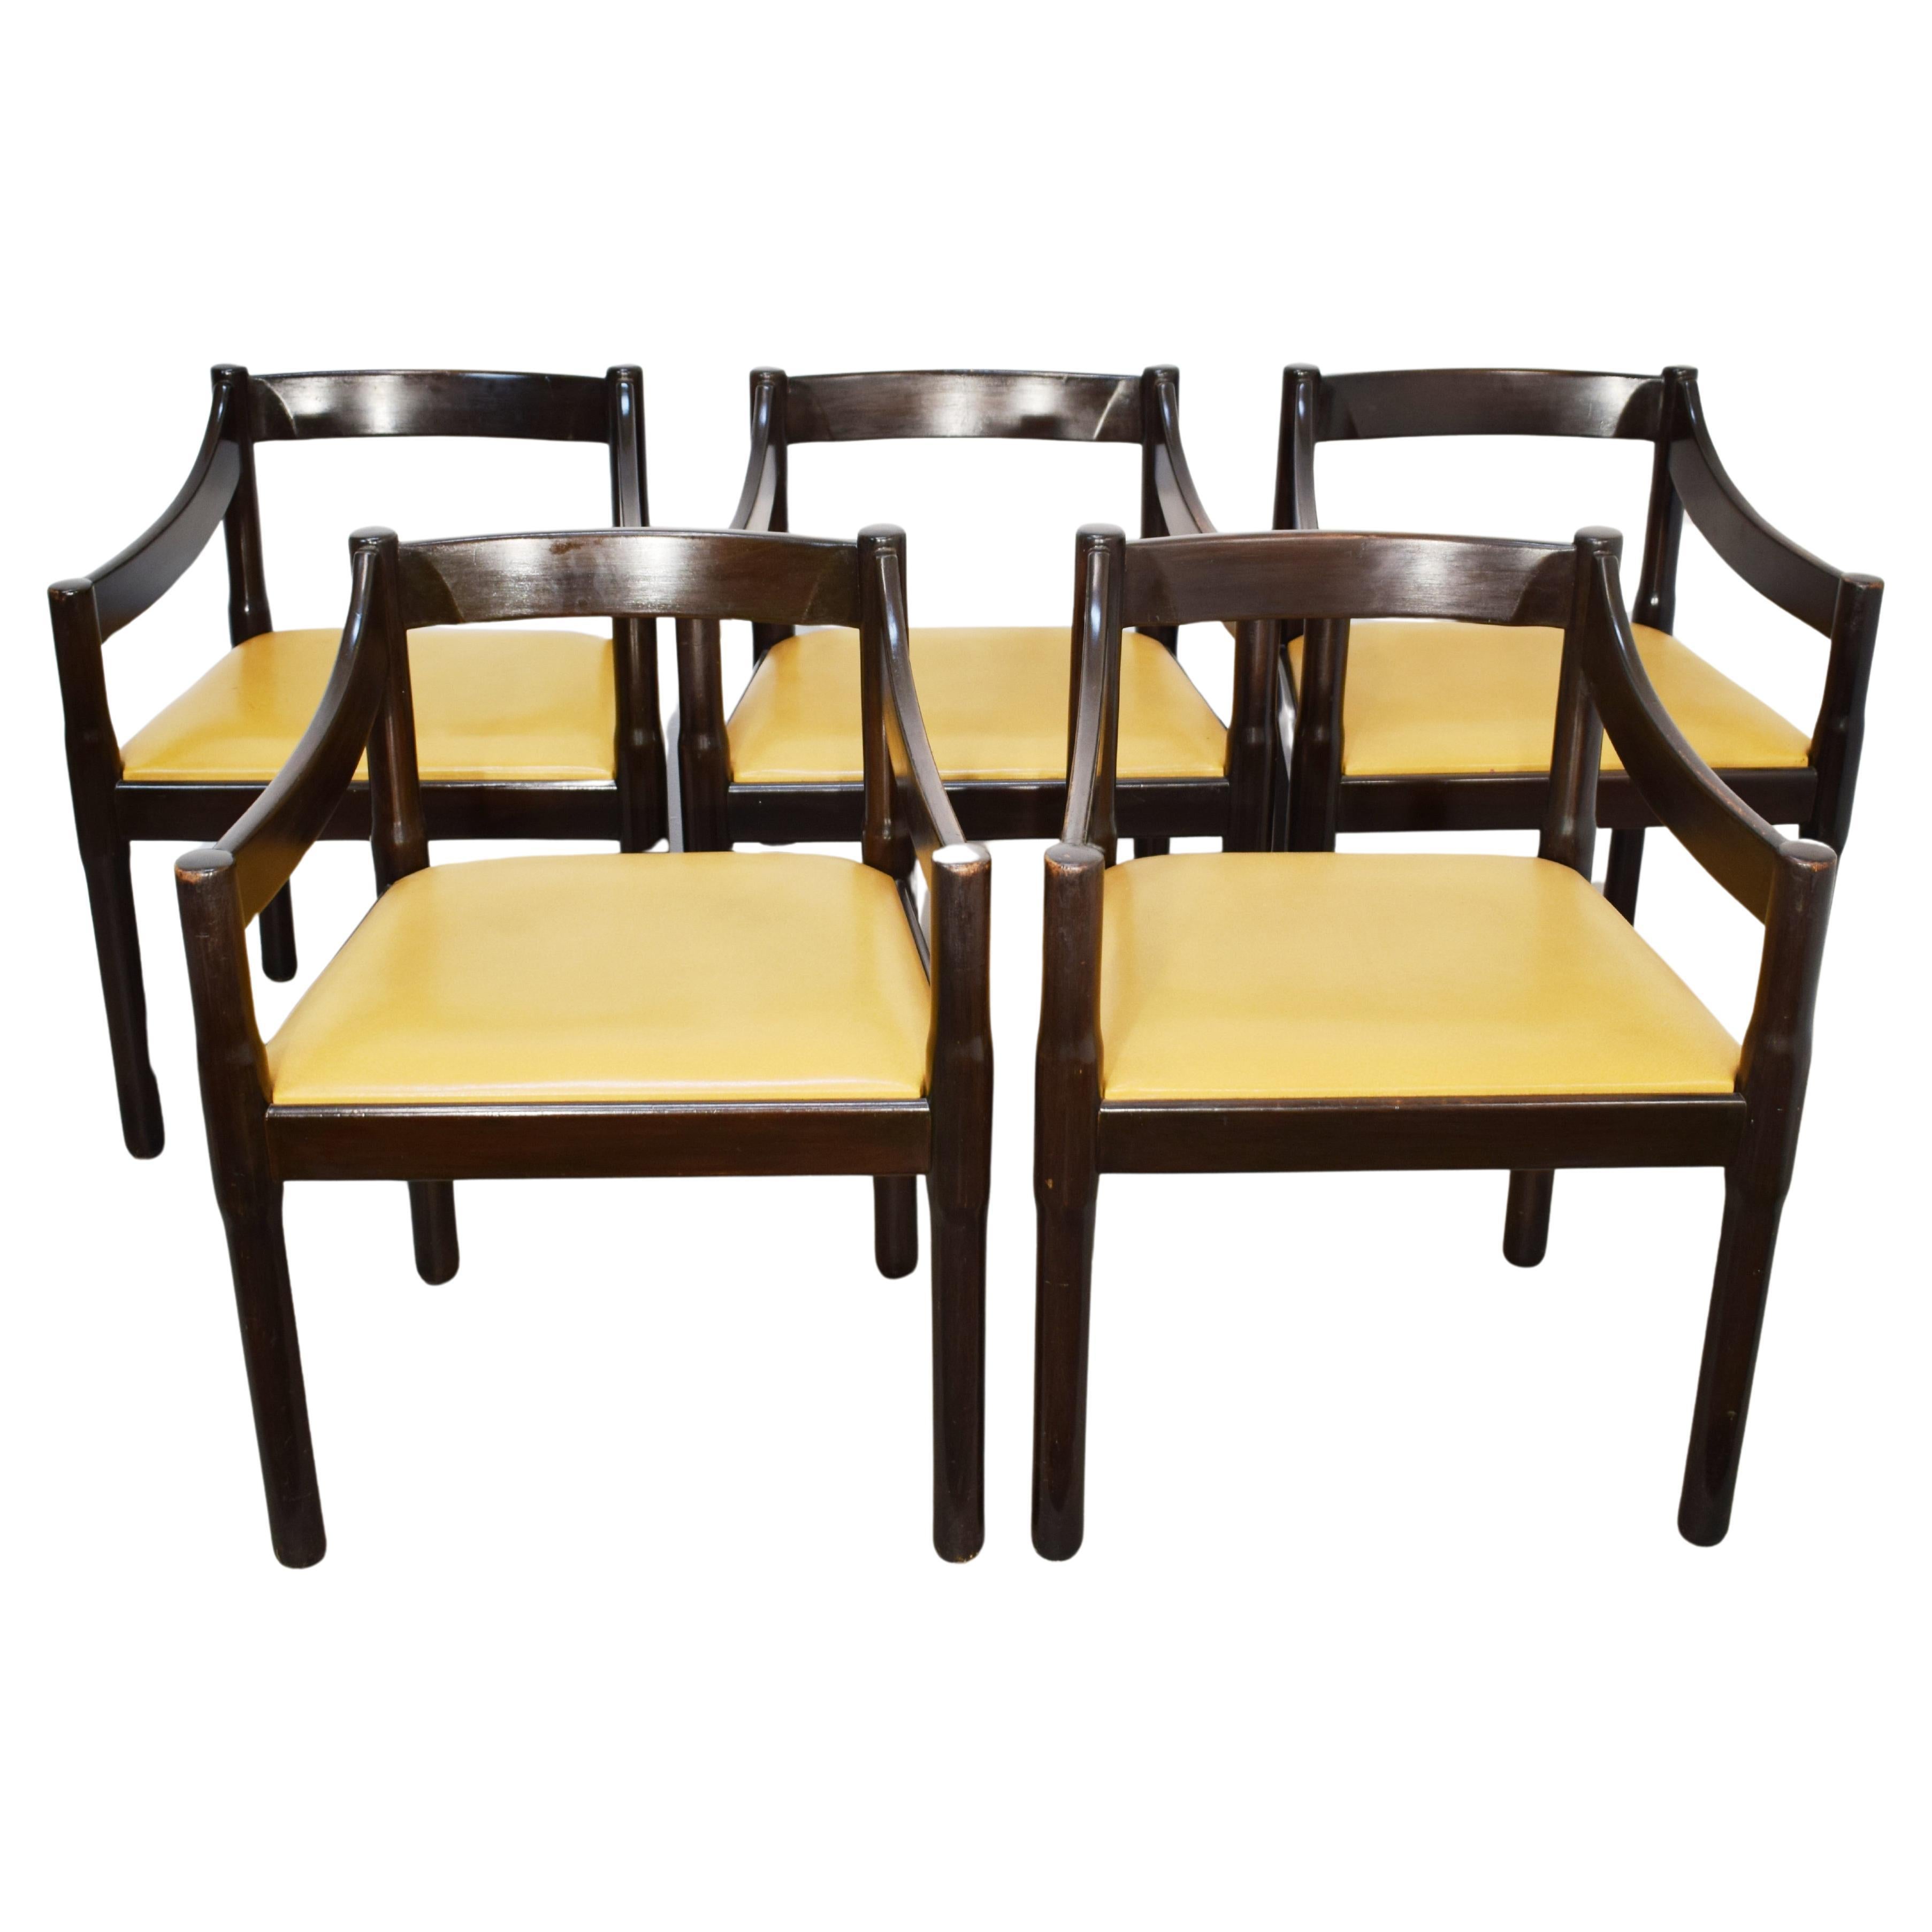 Set of 5 Carimate chairs by Vico Magistretti, Italy, 1960s For Sale